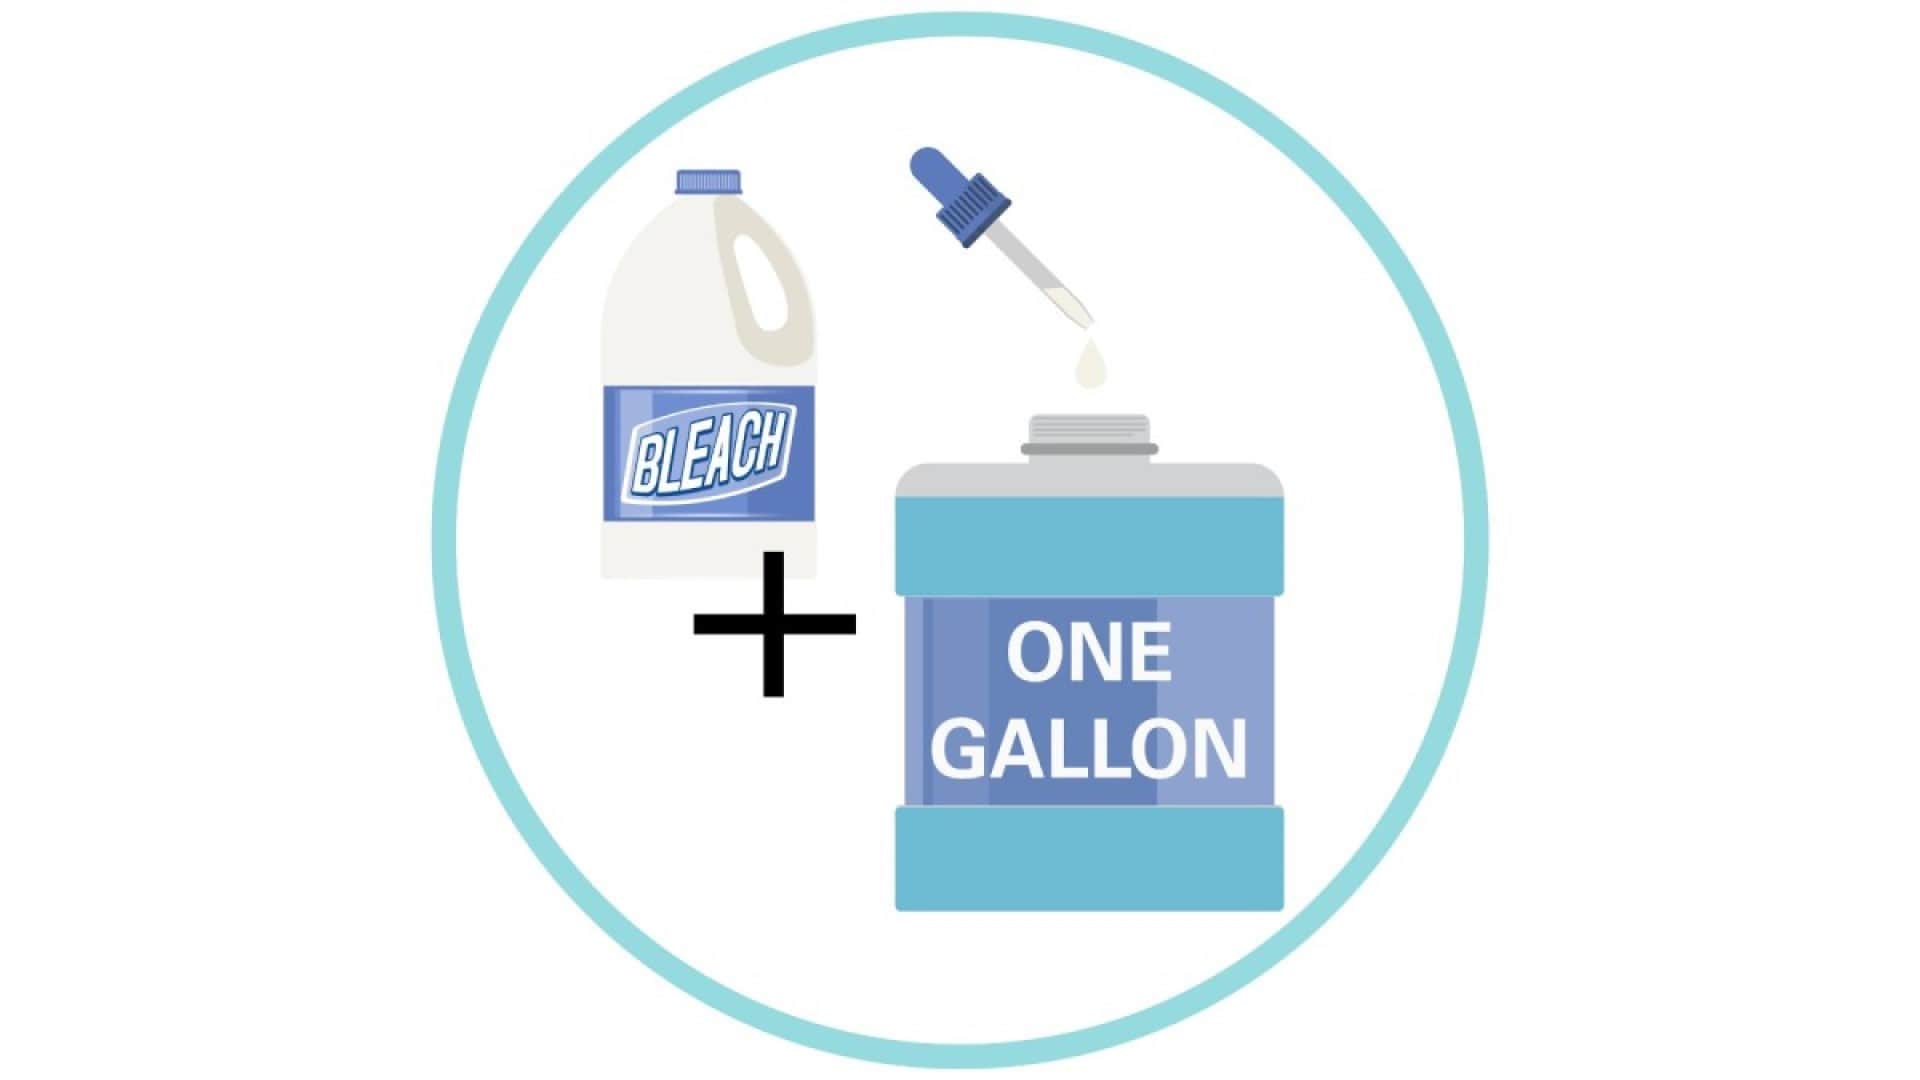 Illustration of a container labeled bleach, a medicine dropper, and a container labeled one gallon.